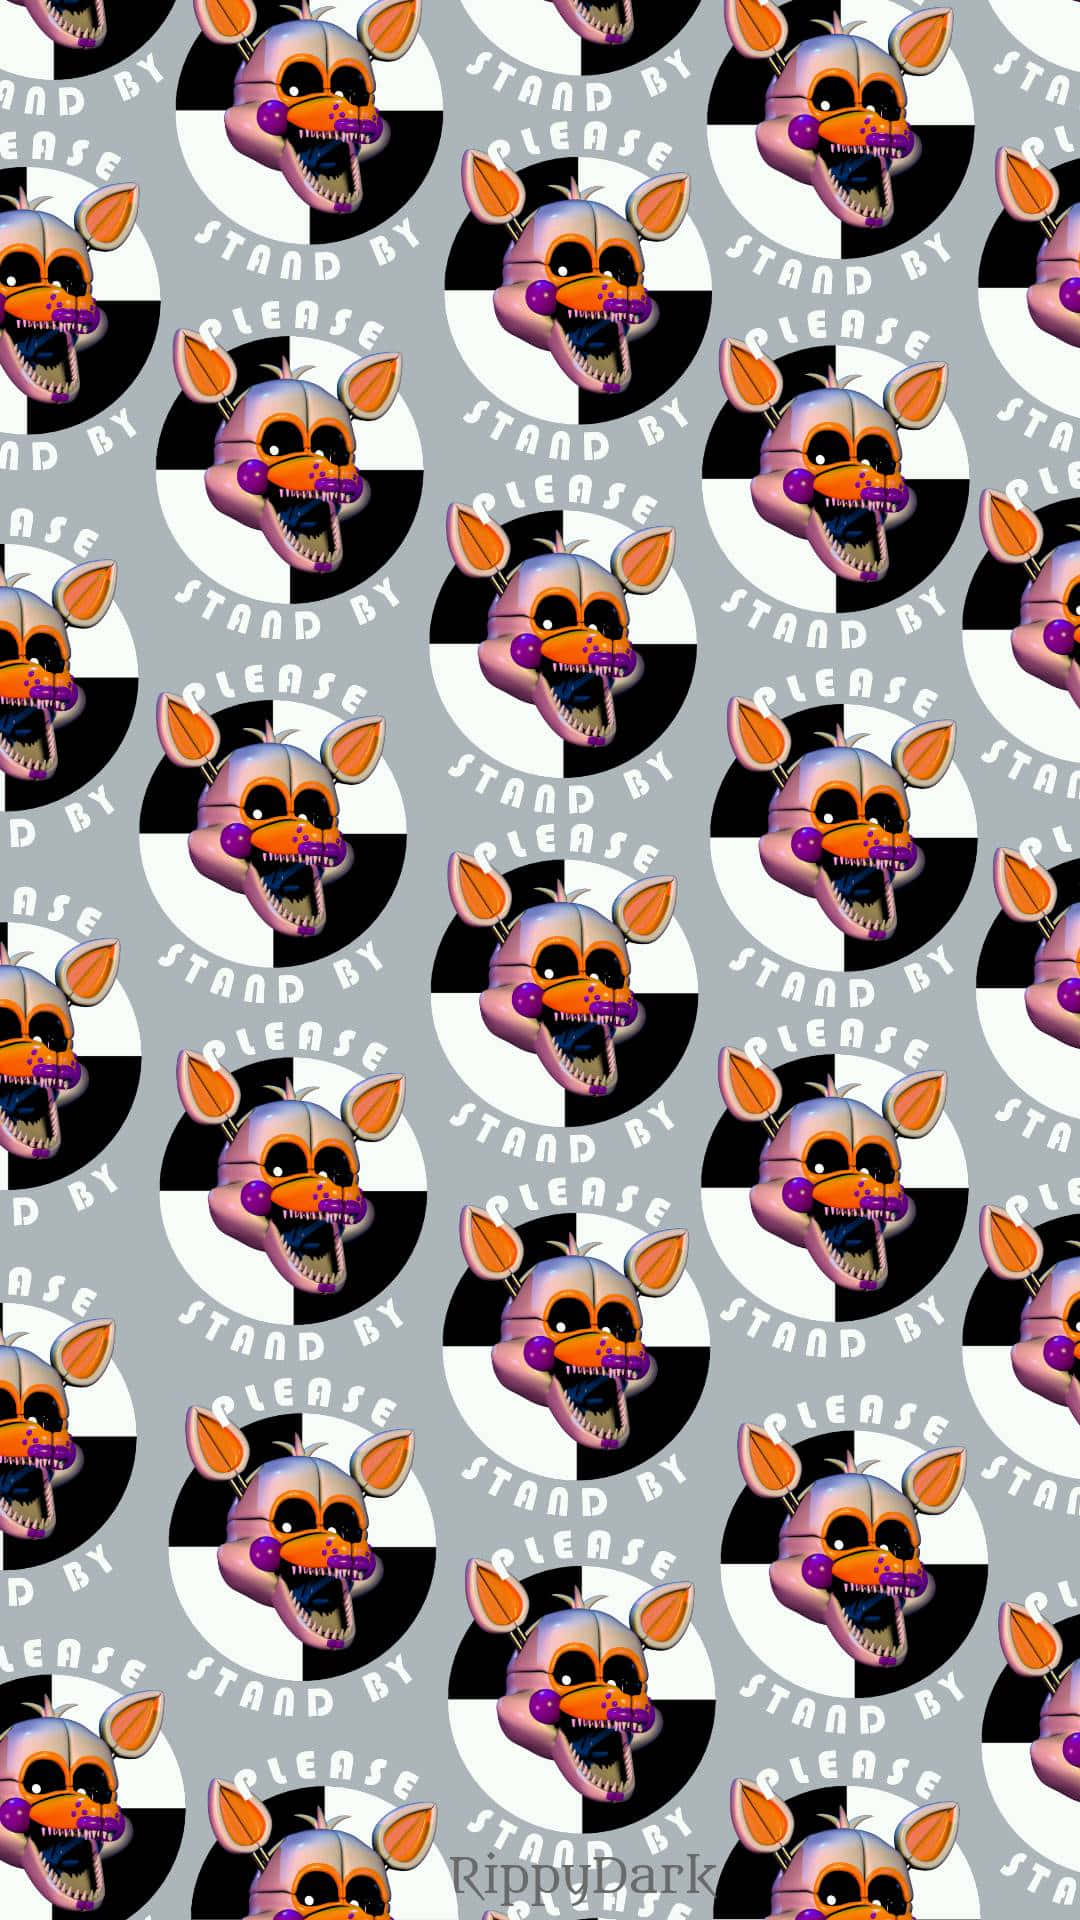 Image  A Cheerful Lolbit Character Wallpaper